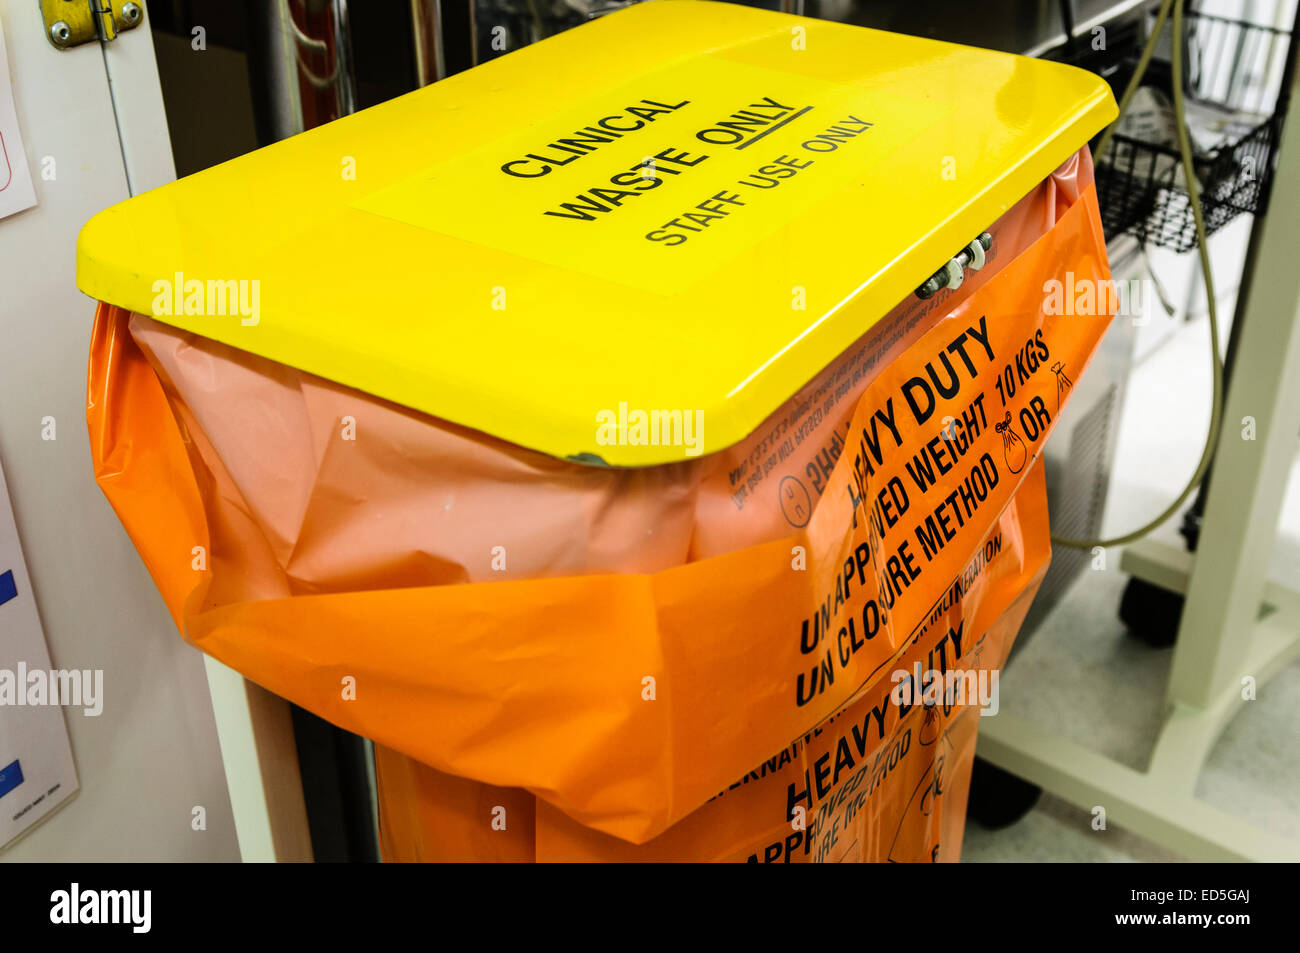 Clinical waste bin in a hospital clinical room. Stock Photo